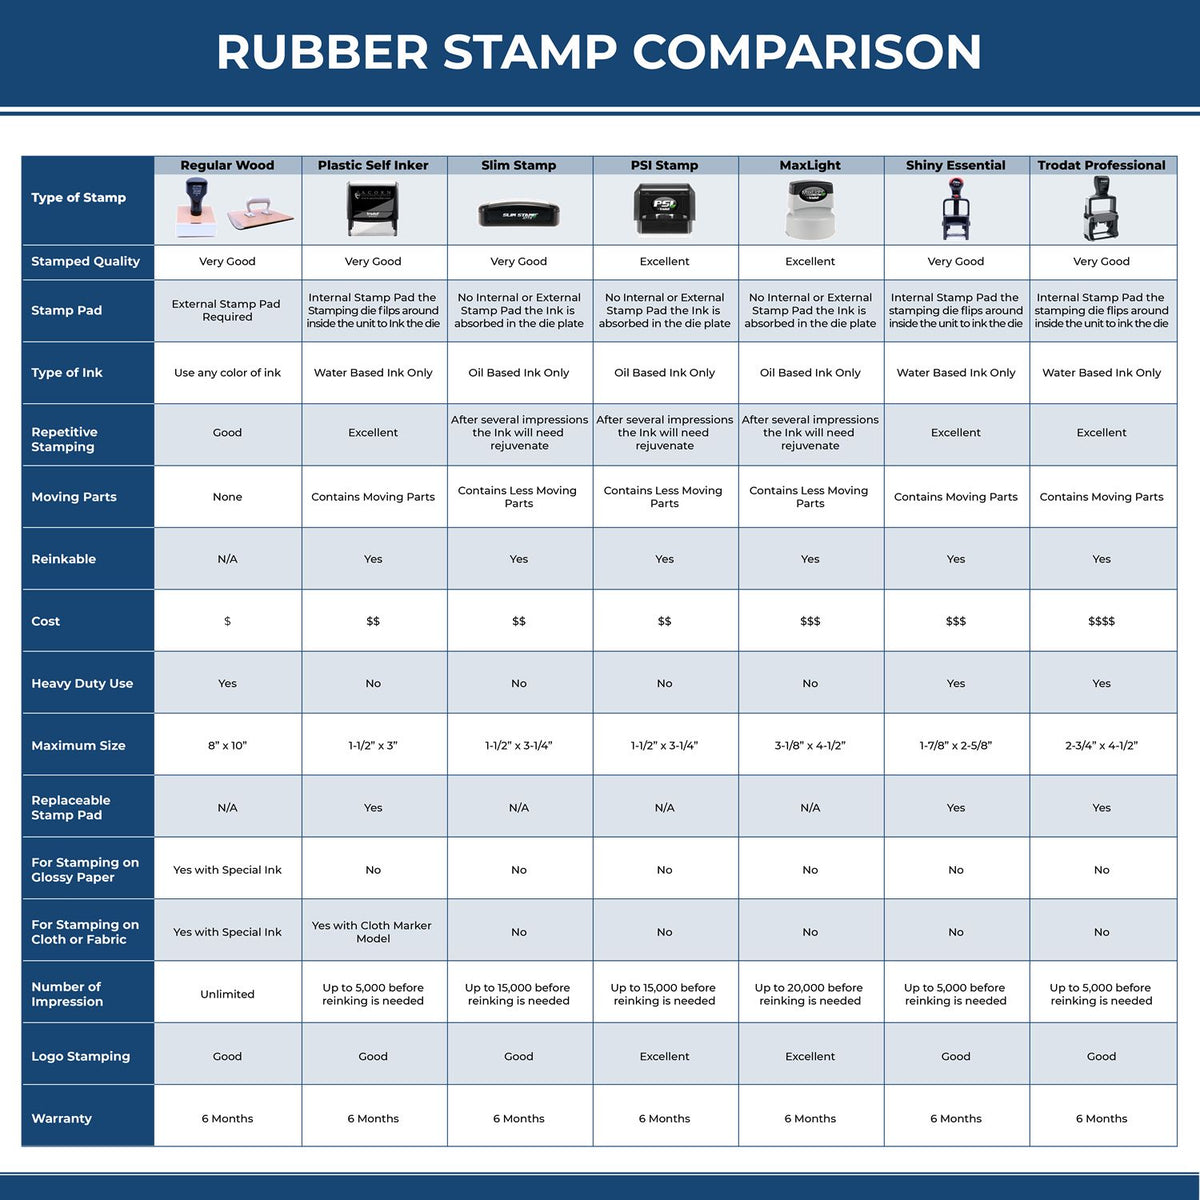 Large Read and Route with Lines Rubber Stamp 5634R Rubber Stamp Comparison